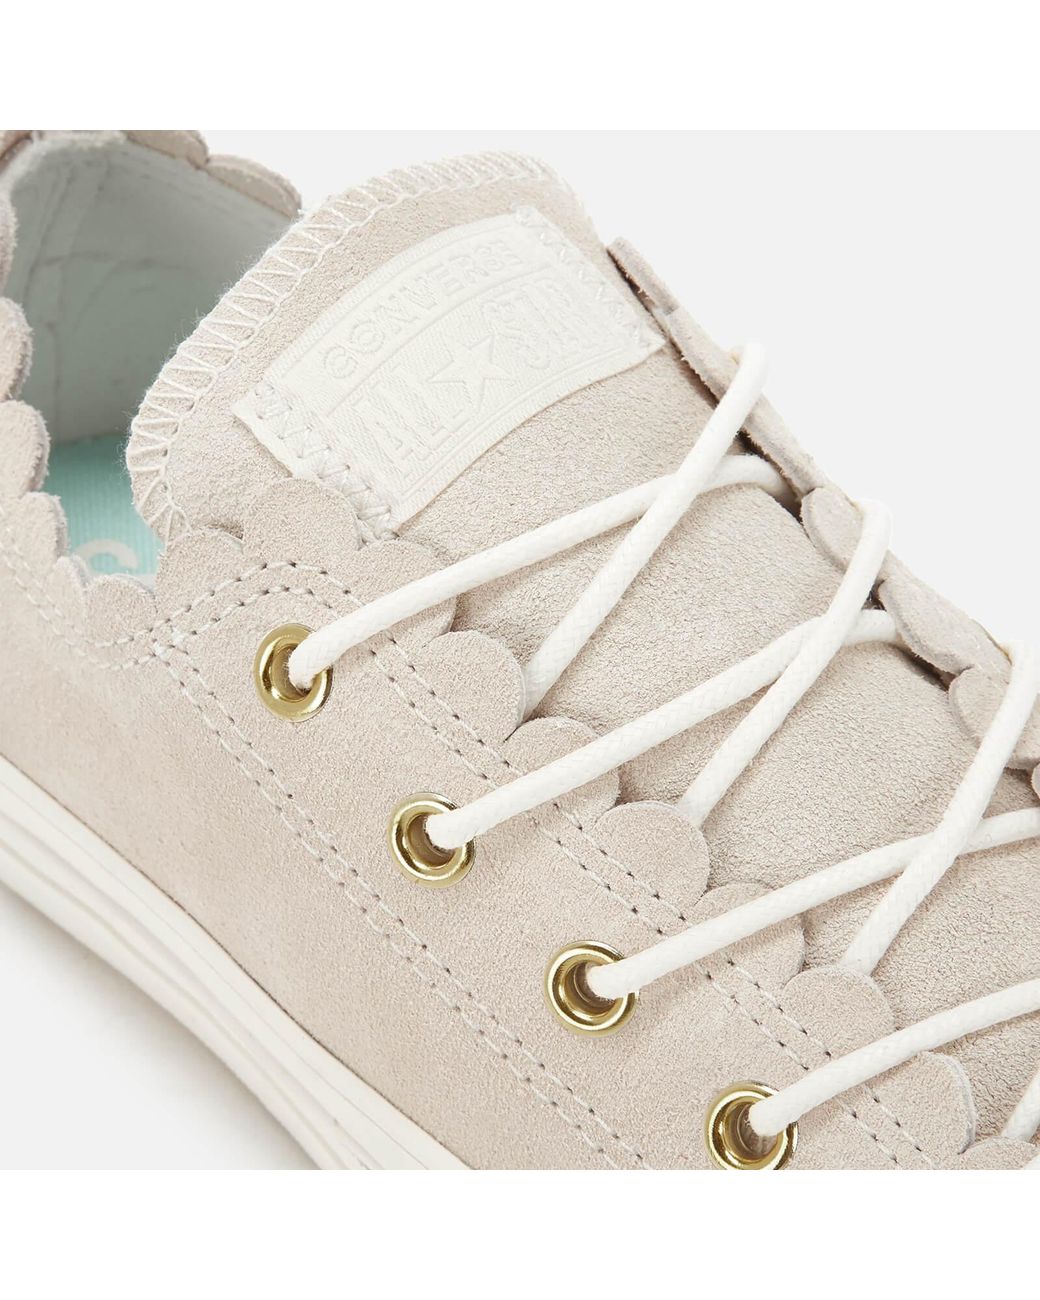 Converse Chuck Taylor All Star Scalloped Edge Ox Trainers in Natural | Lyst